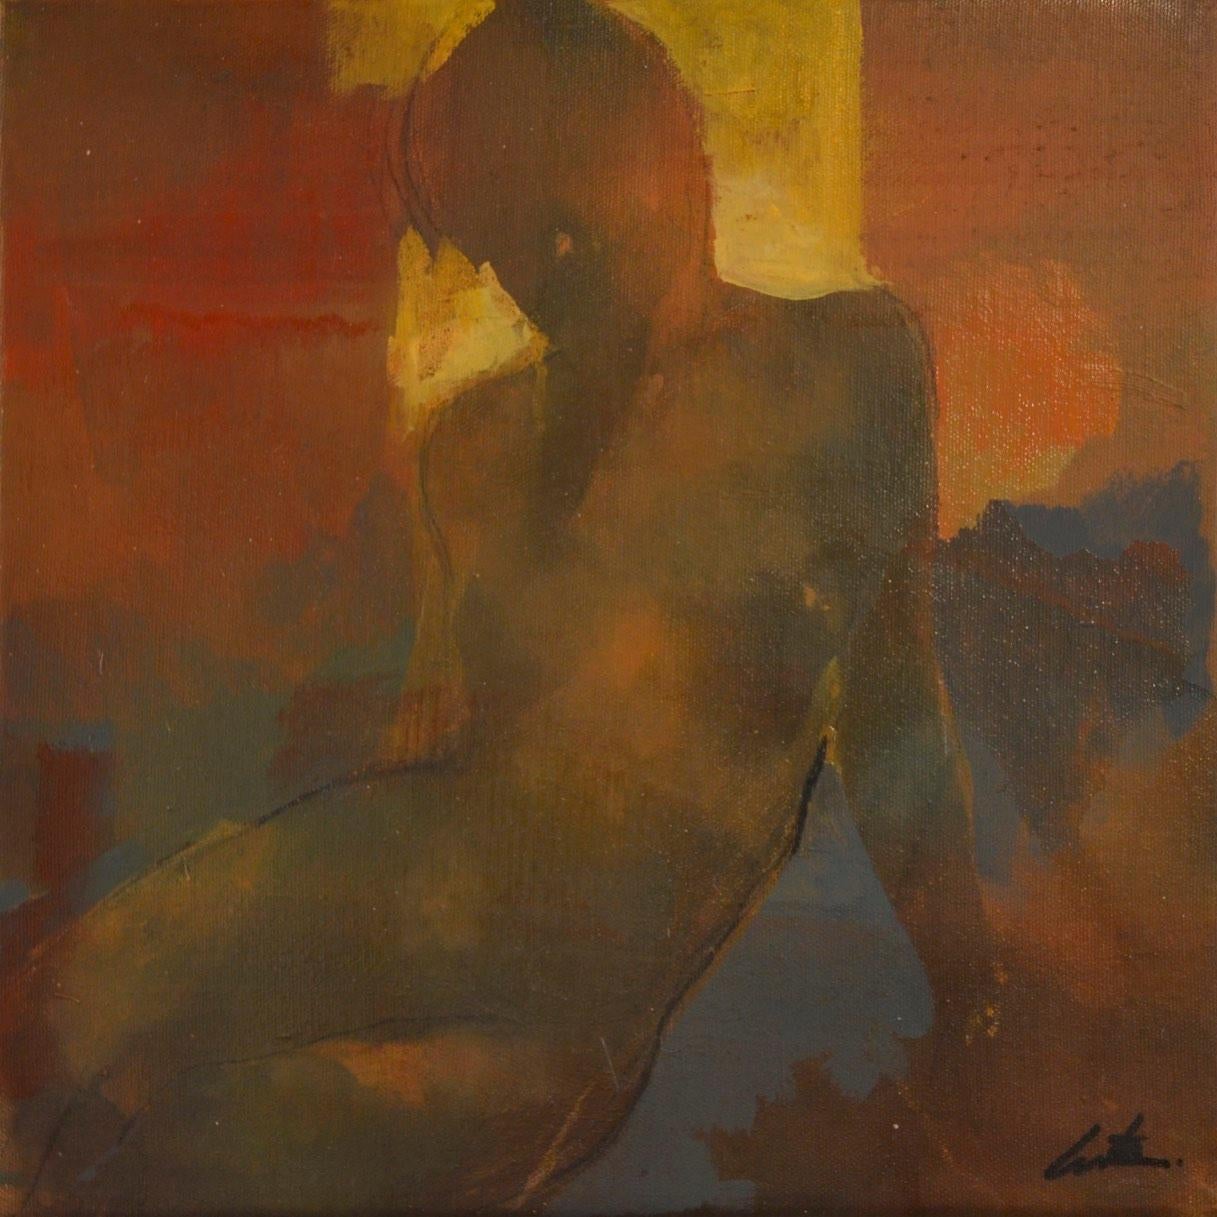 Shadow I by Bill Bate 
original and hand signed by the artist 
sold unframed
Image size: H:30cm x W:30cm 
Complete size of unframed work: H:30cm x W:30cm x D:2.5cm

Shadow I- surreal figurative painting by Bill Bate.
Original oil on canvas and is